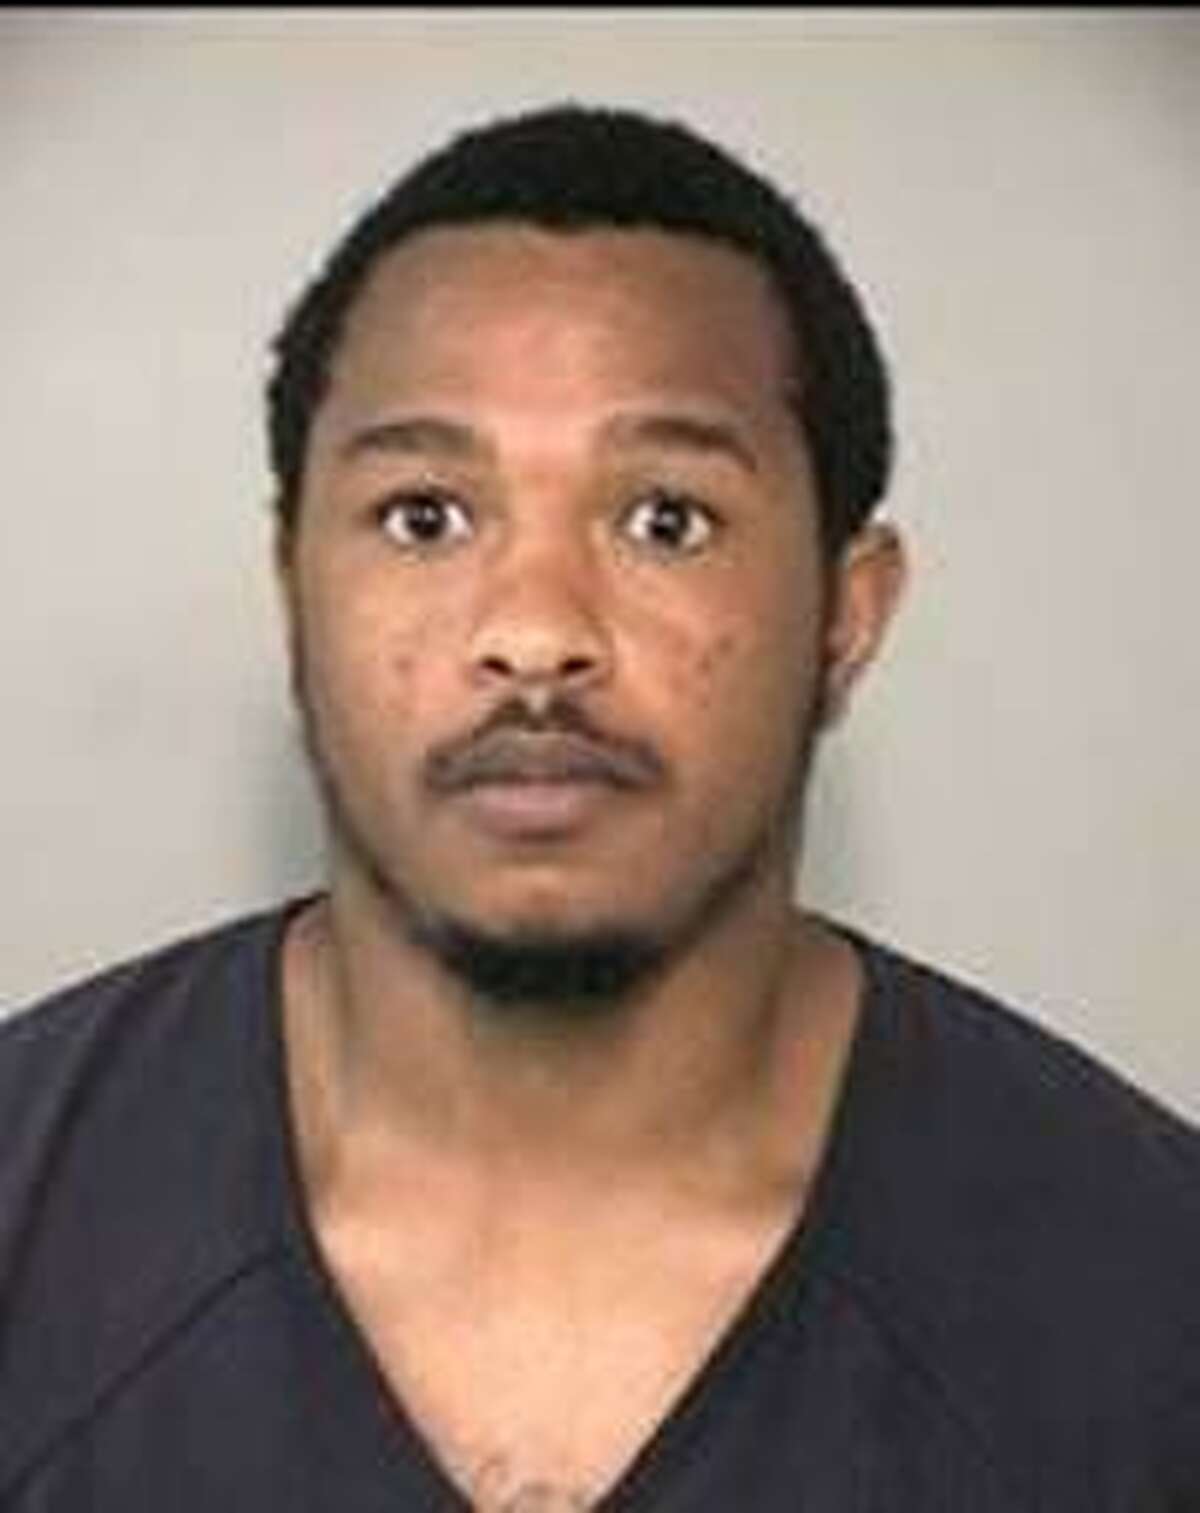 Richmond man Devonte Howard, 27, has been arrested for allegedly shooting and killing a coworker.